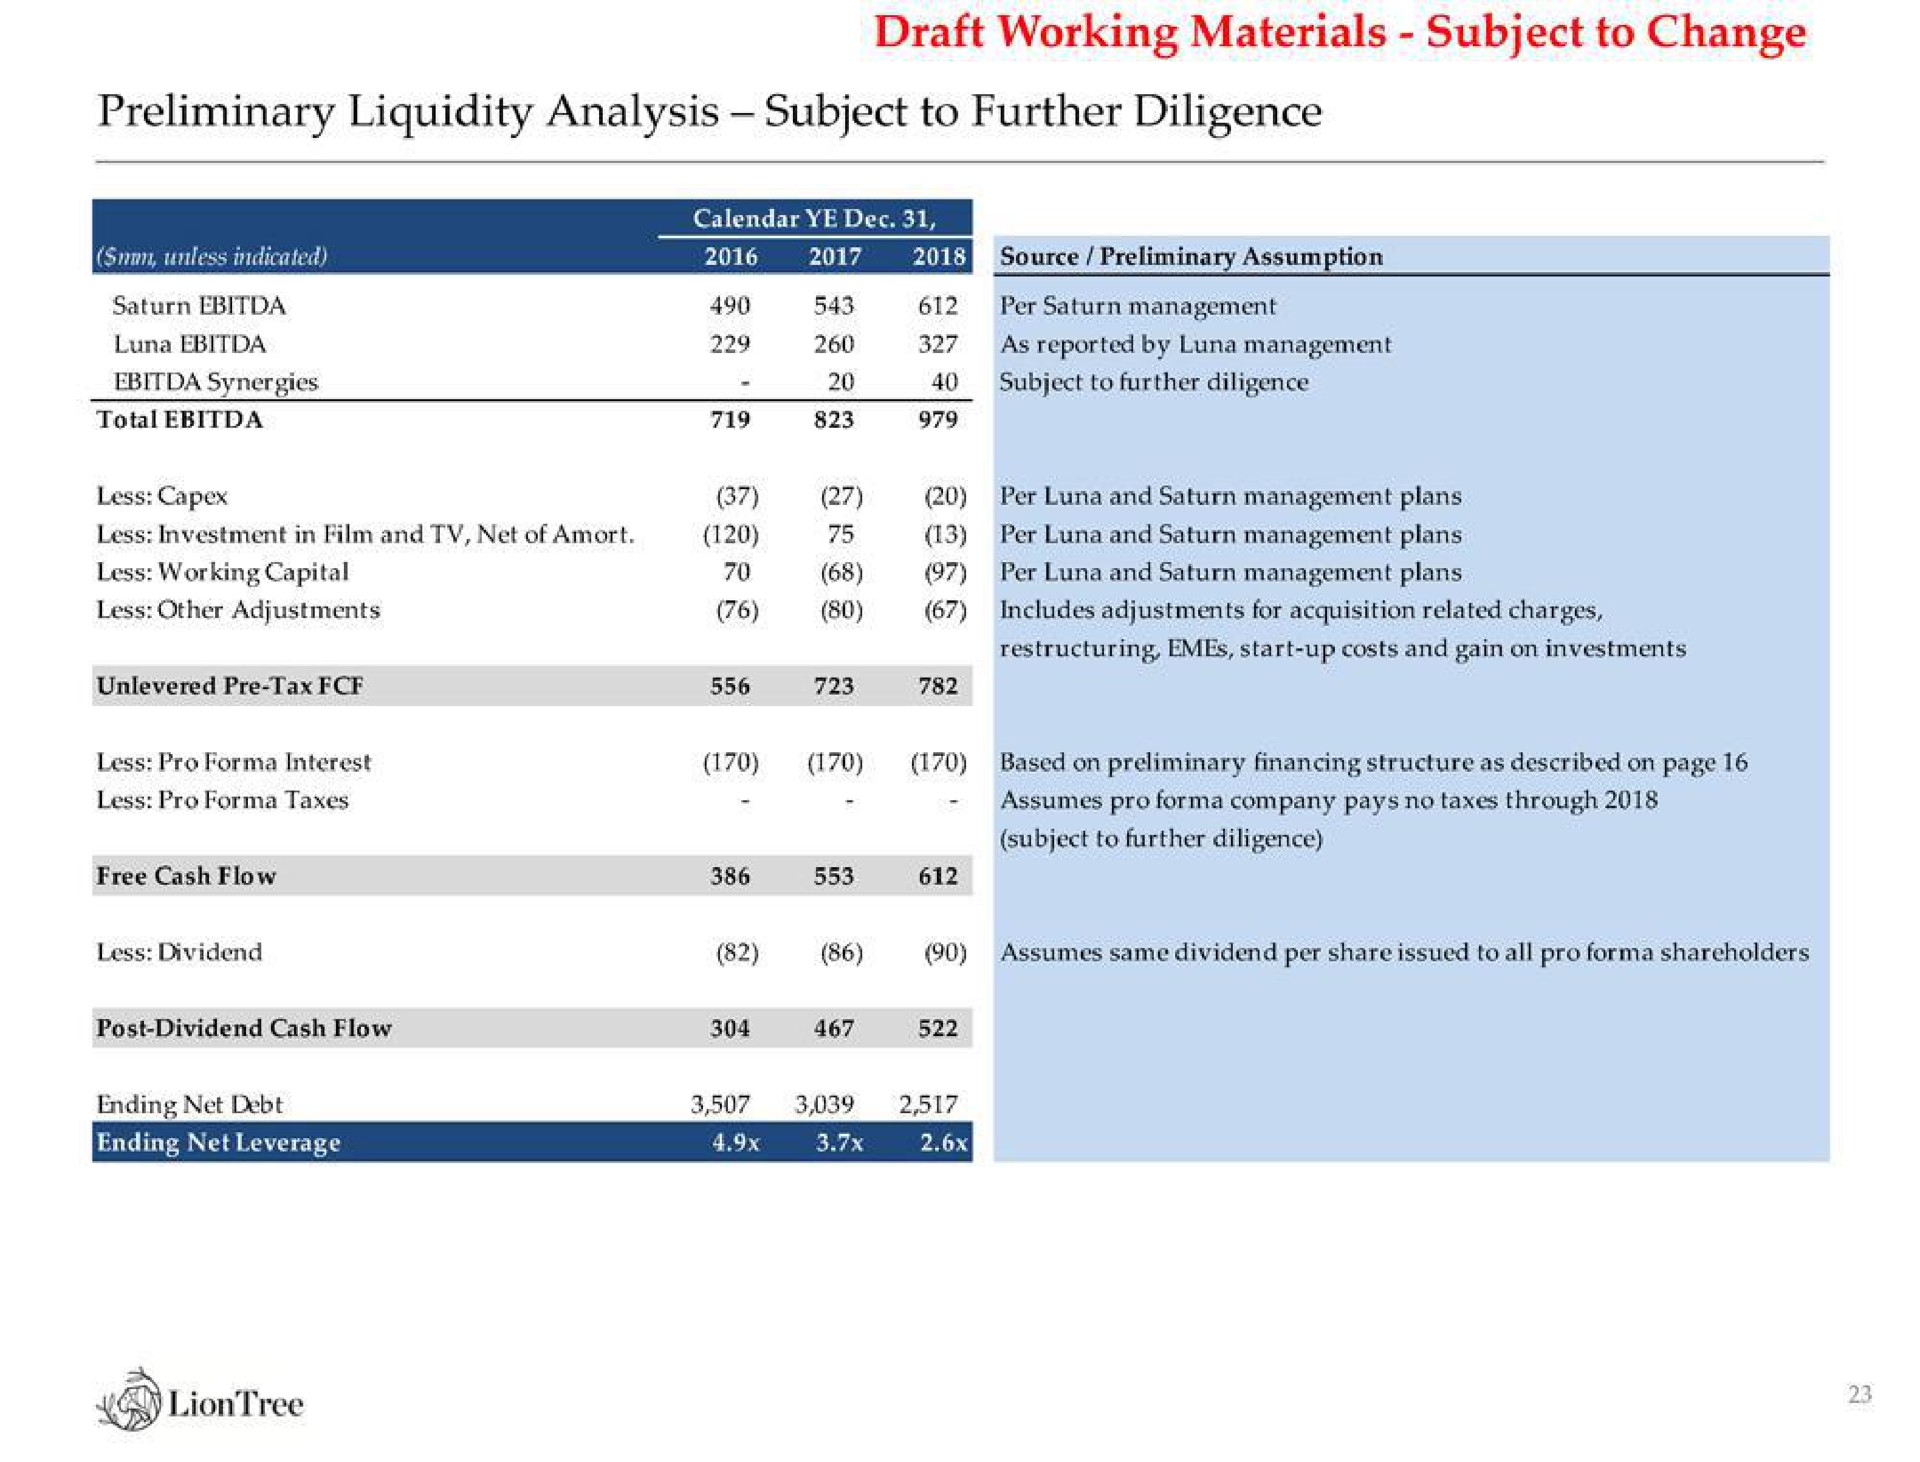 preliminary liquidity analysis subject to further diligence draft working materials subject to change | LionTree